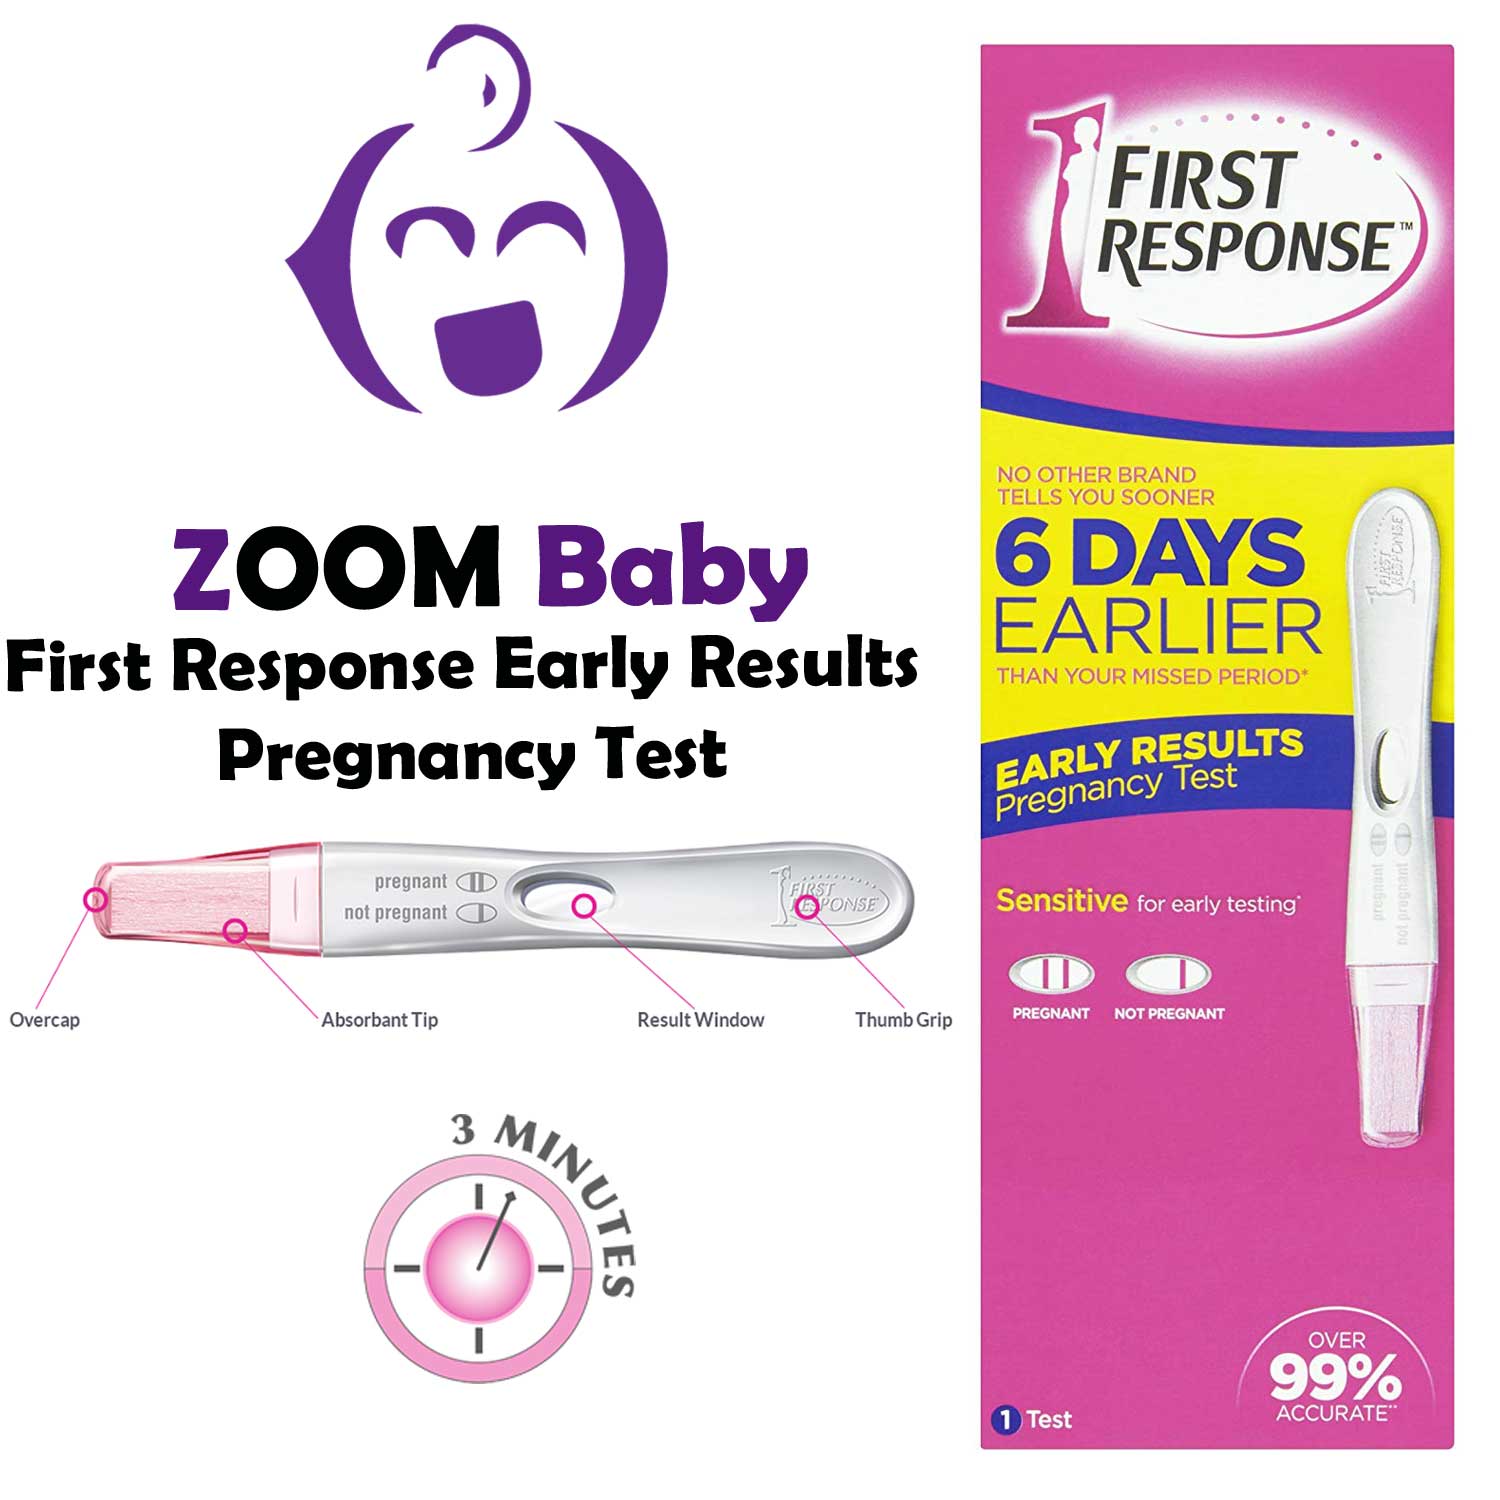 https://www.zoomhealth.co.uk/wp-content/uploads/2015/04/early-results-pregnancy-test.jpg